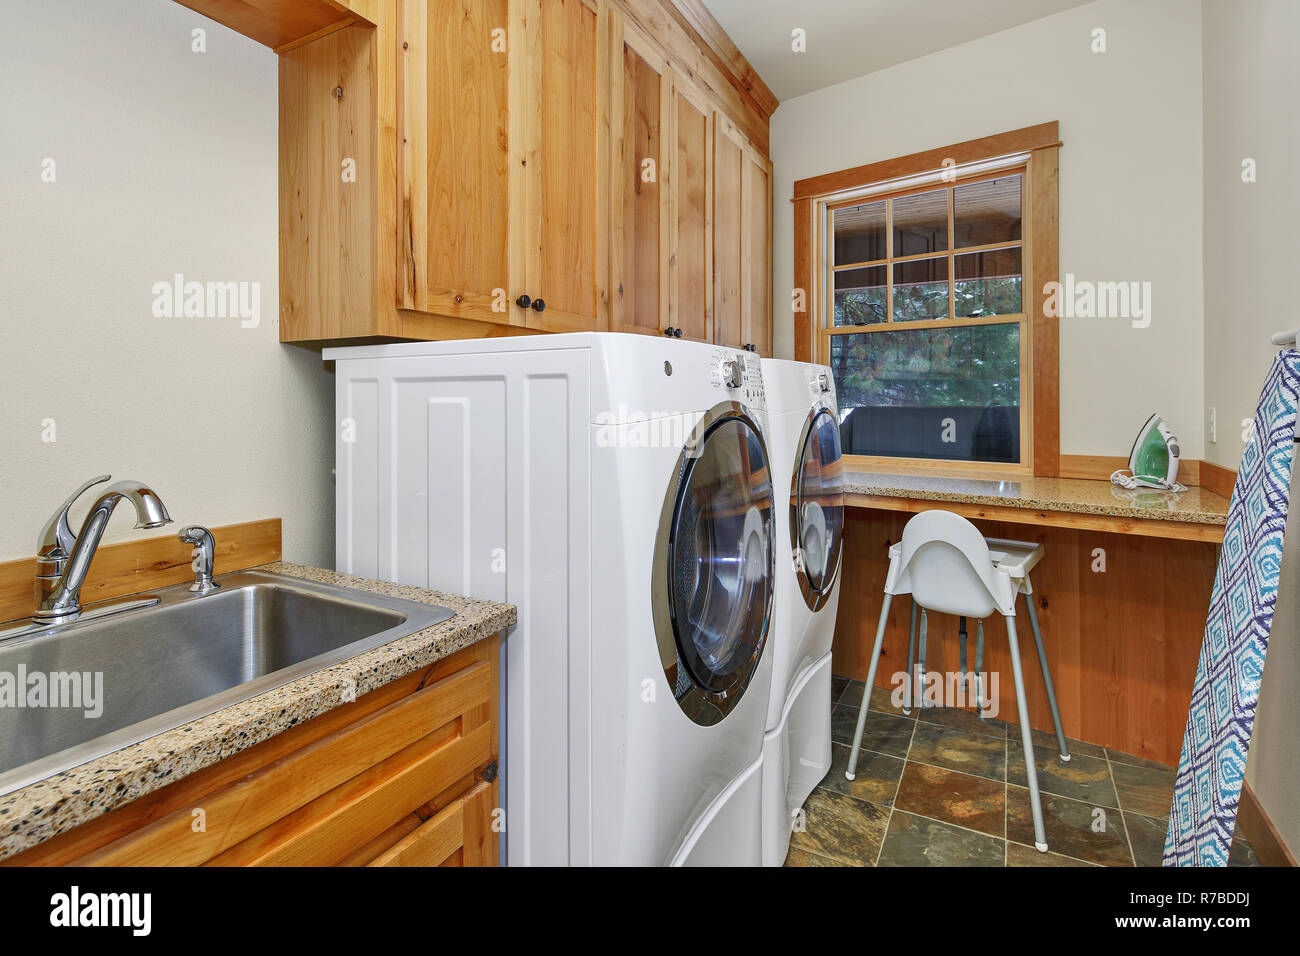 Laundry Room Interior With Sink And Cabinets Stock Photo